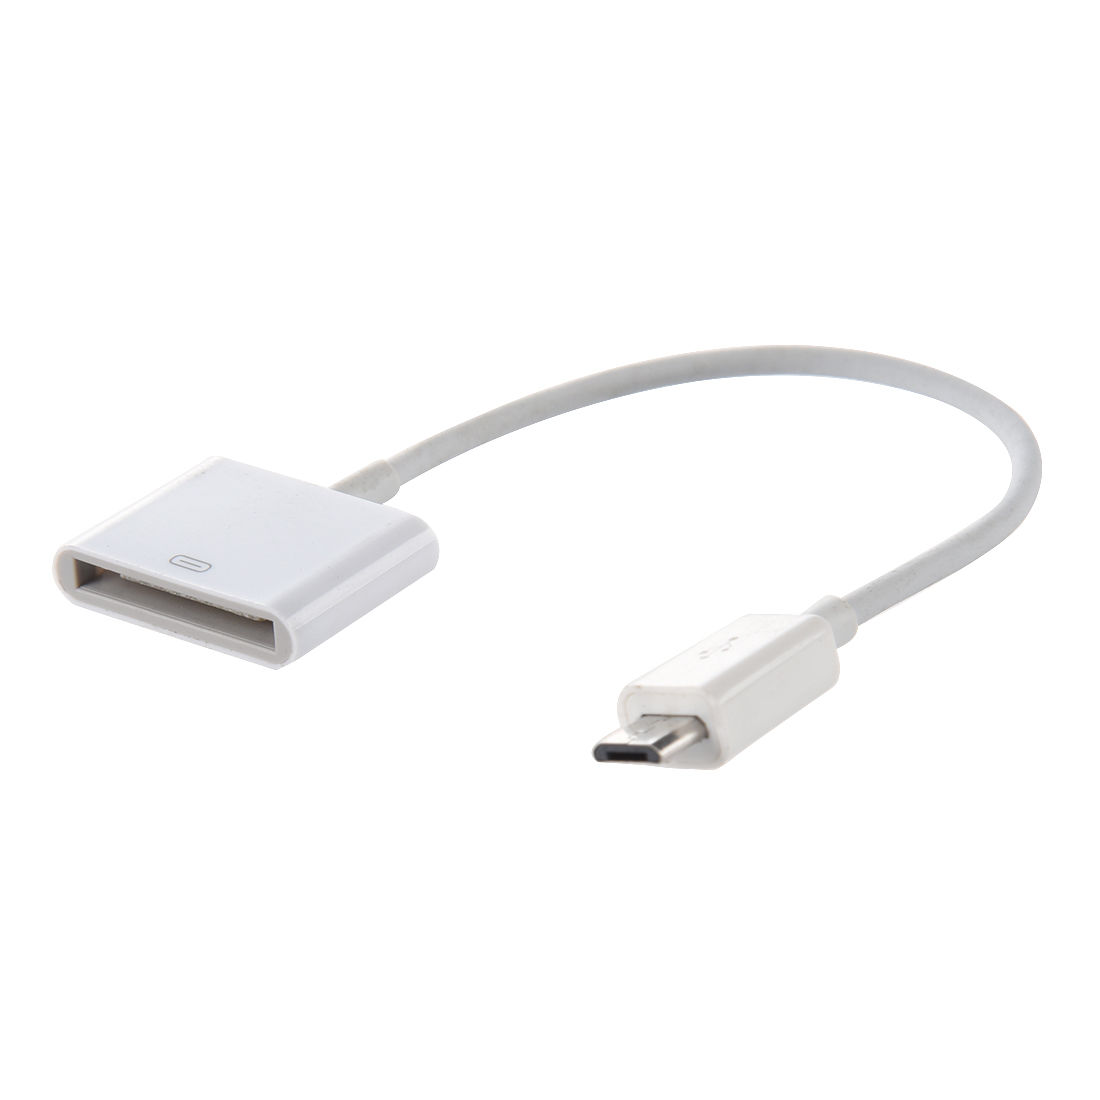 Apple R4Z1 AC Adapter Power Supply Cord Cable Charger